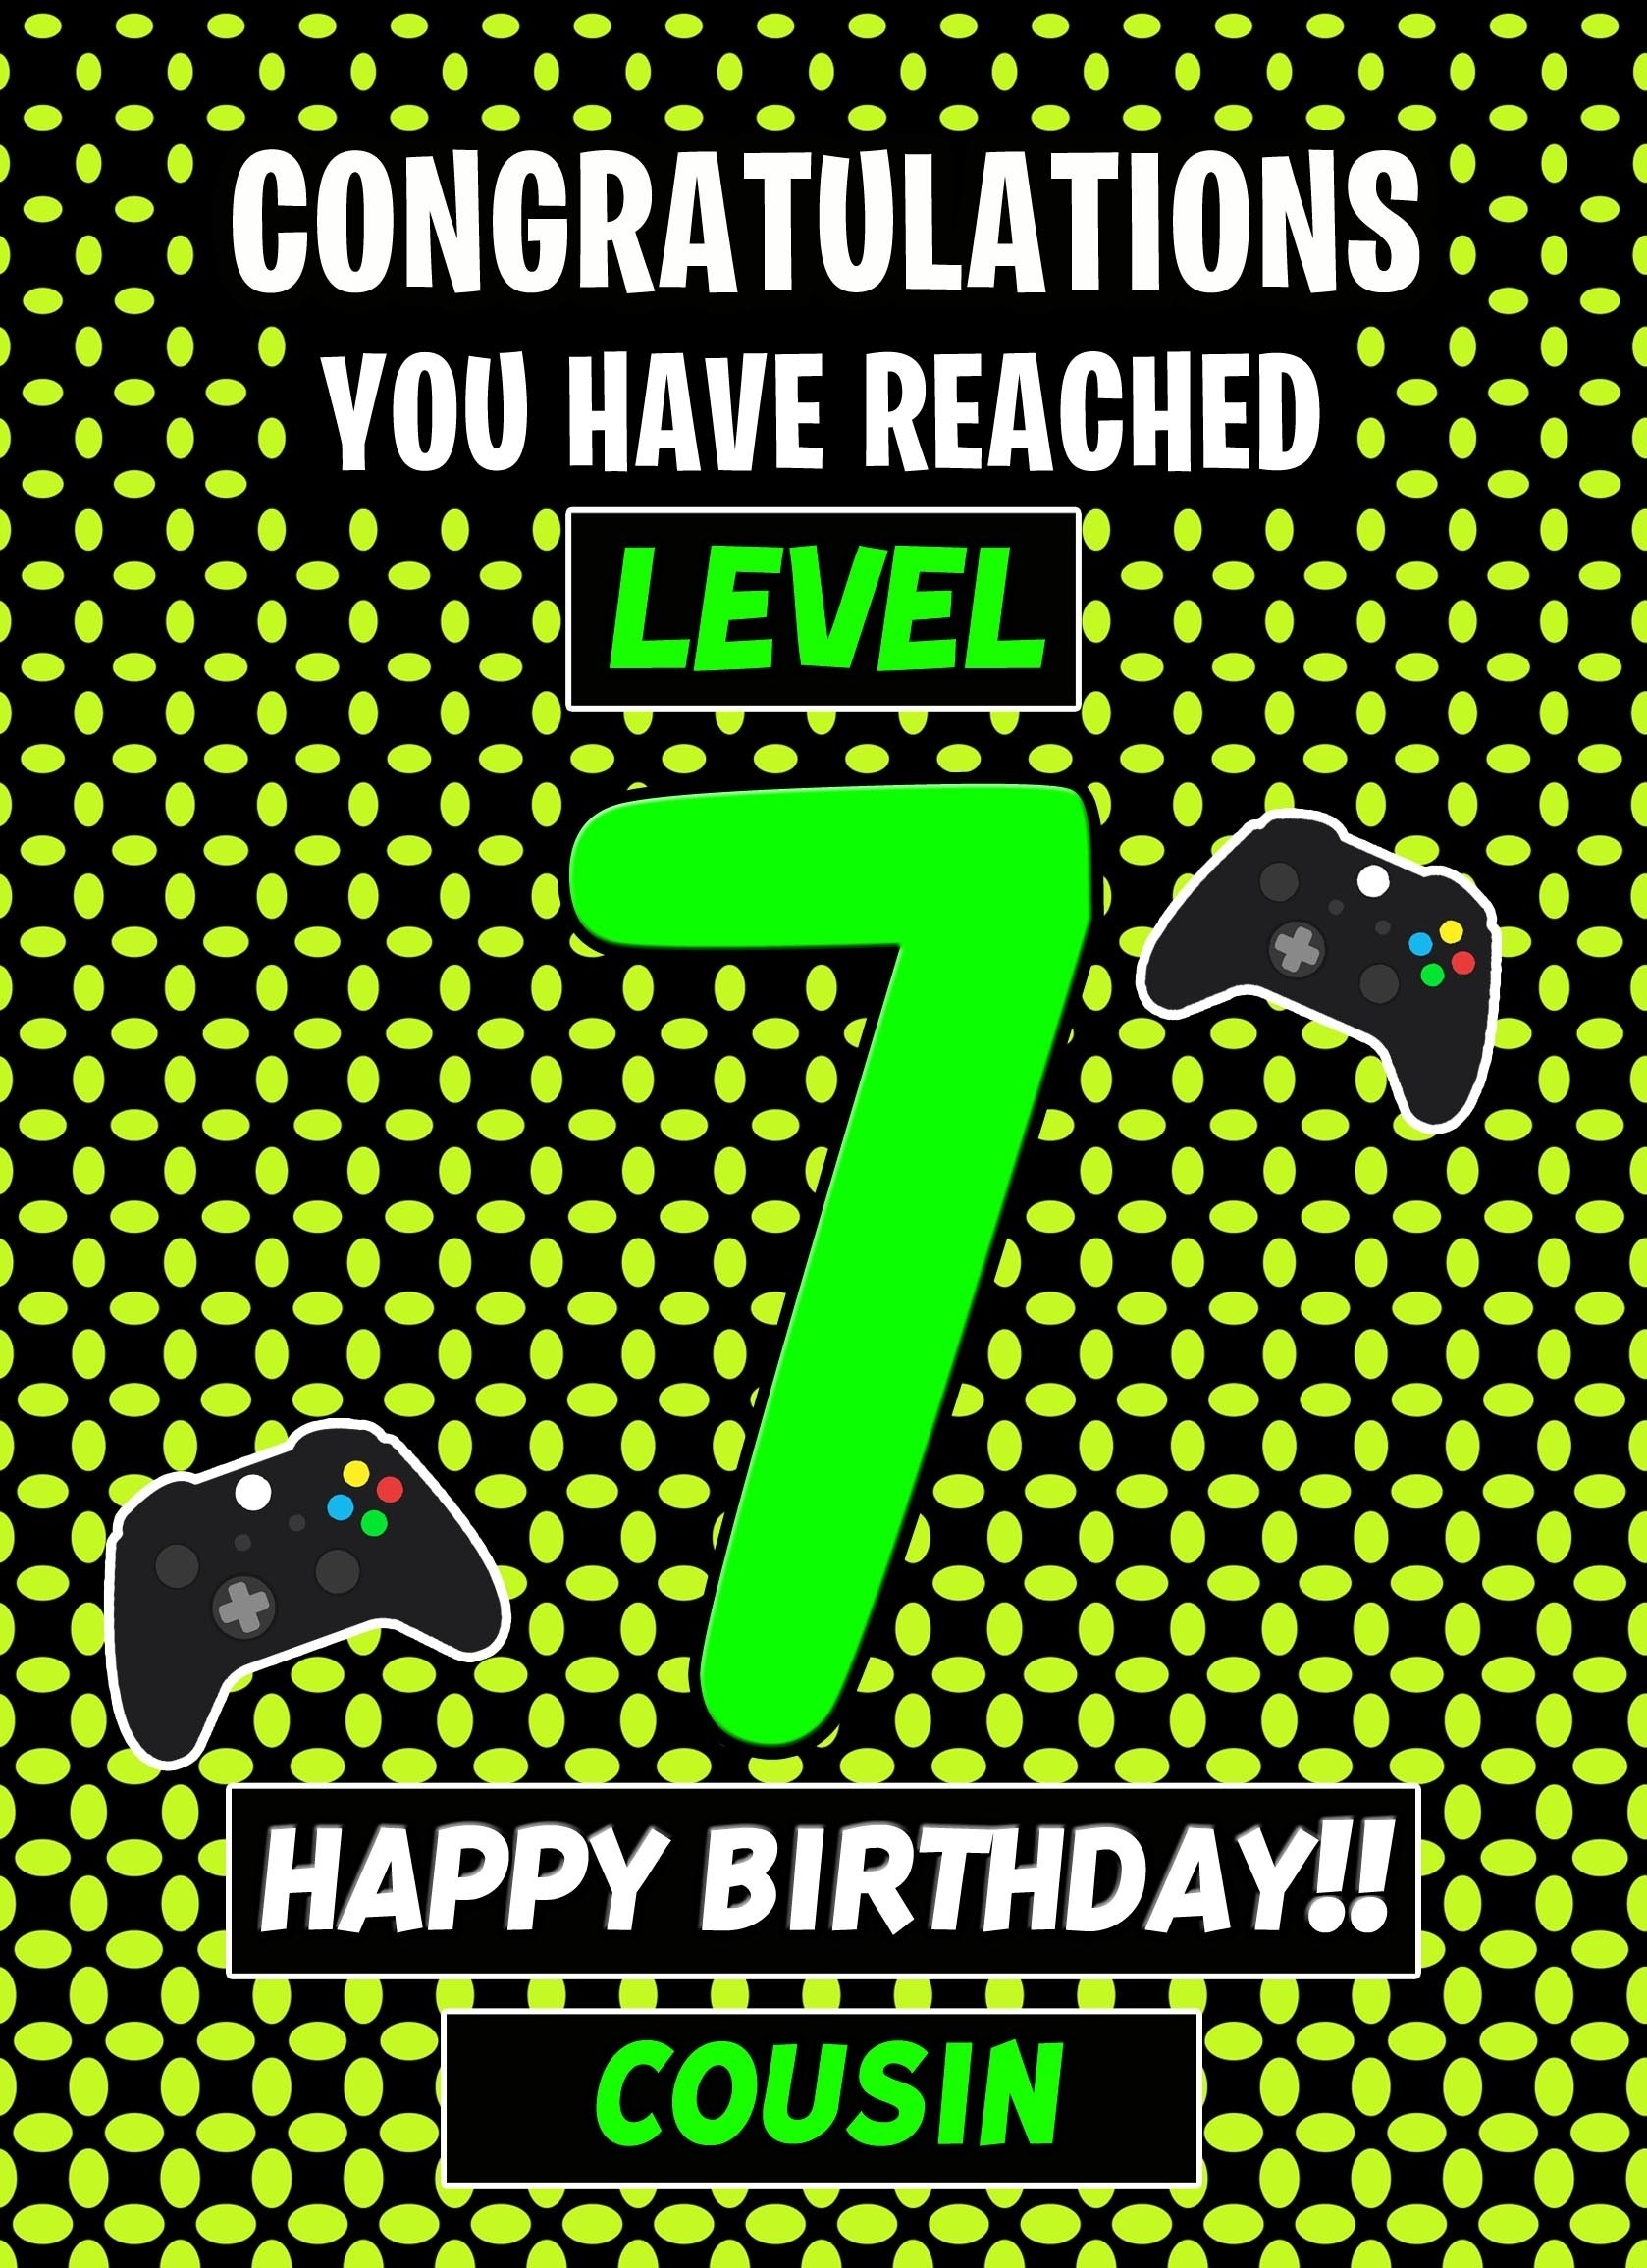 Cousin 7th Birthday Card (Level Up Gamer)